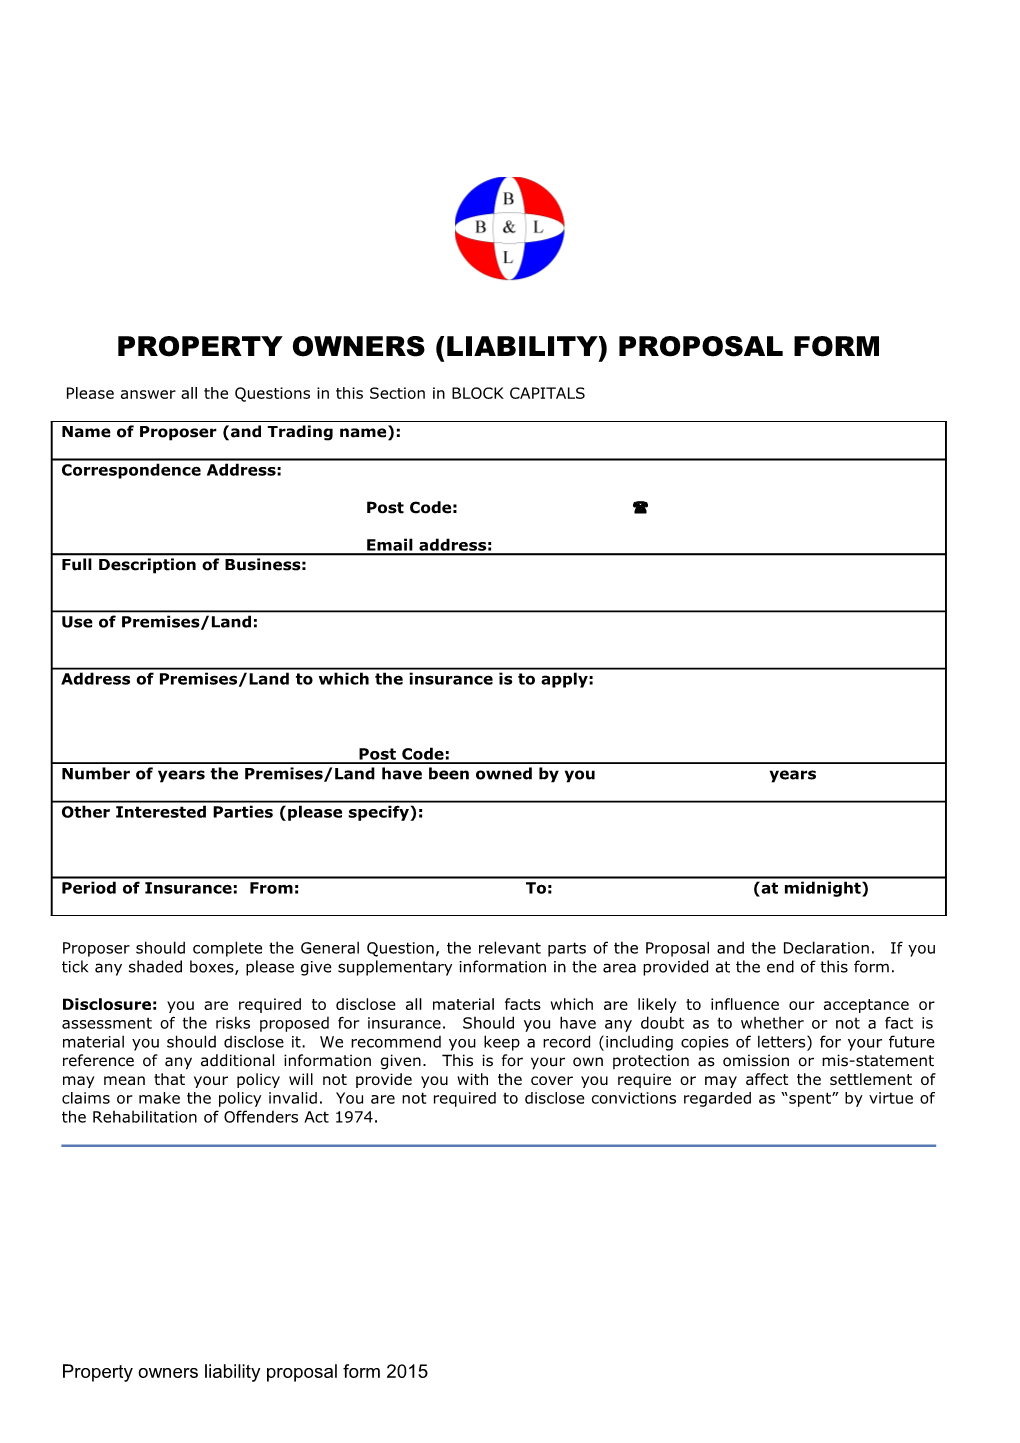 Property Owners (Liability) Proposal Form